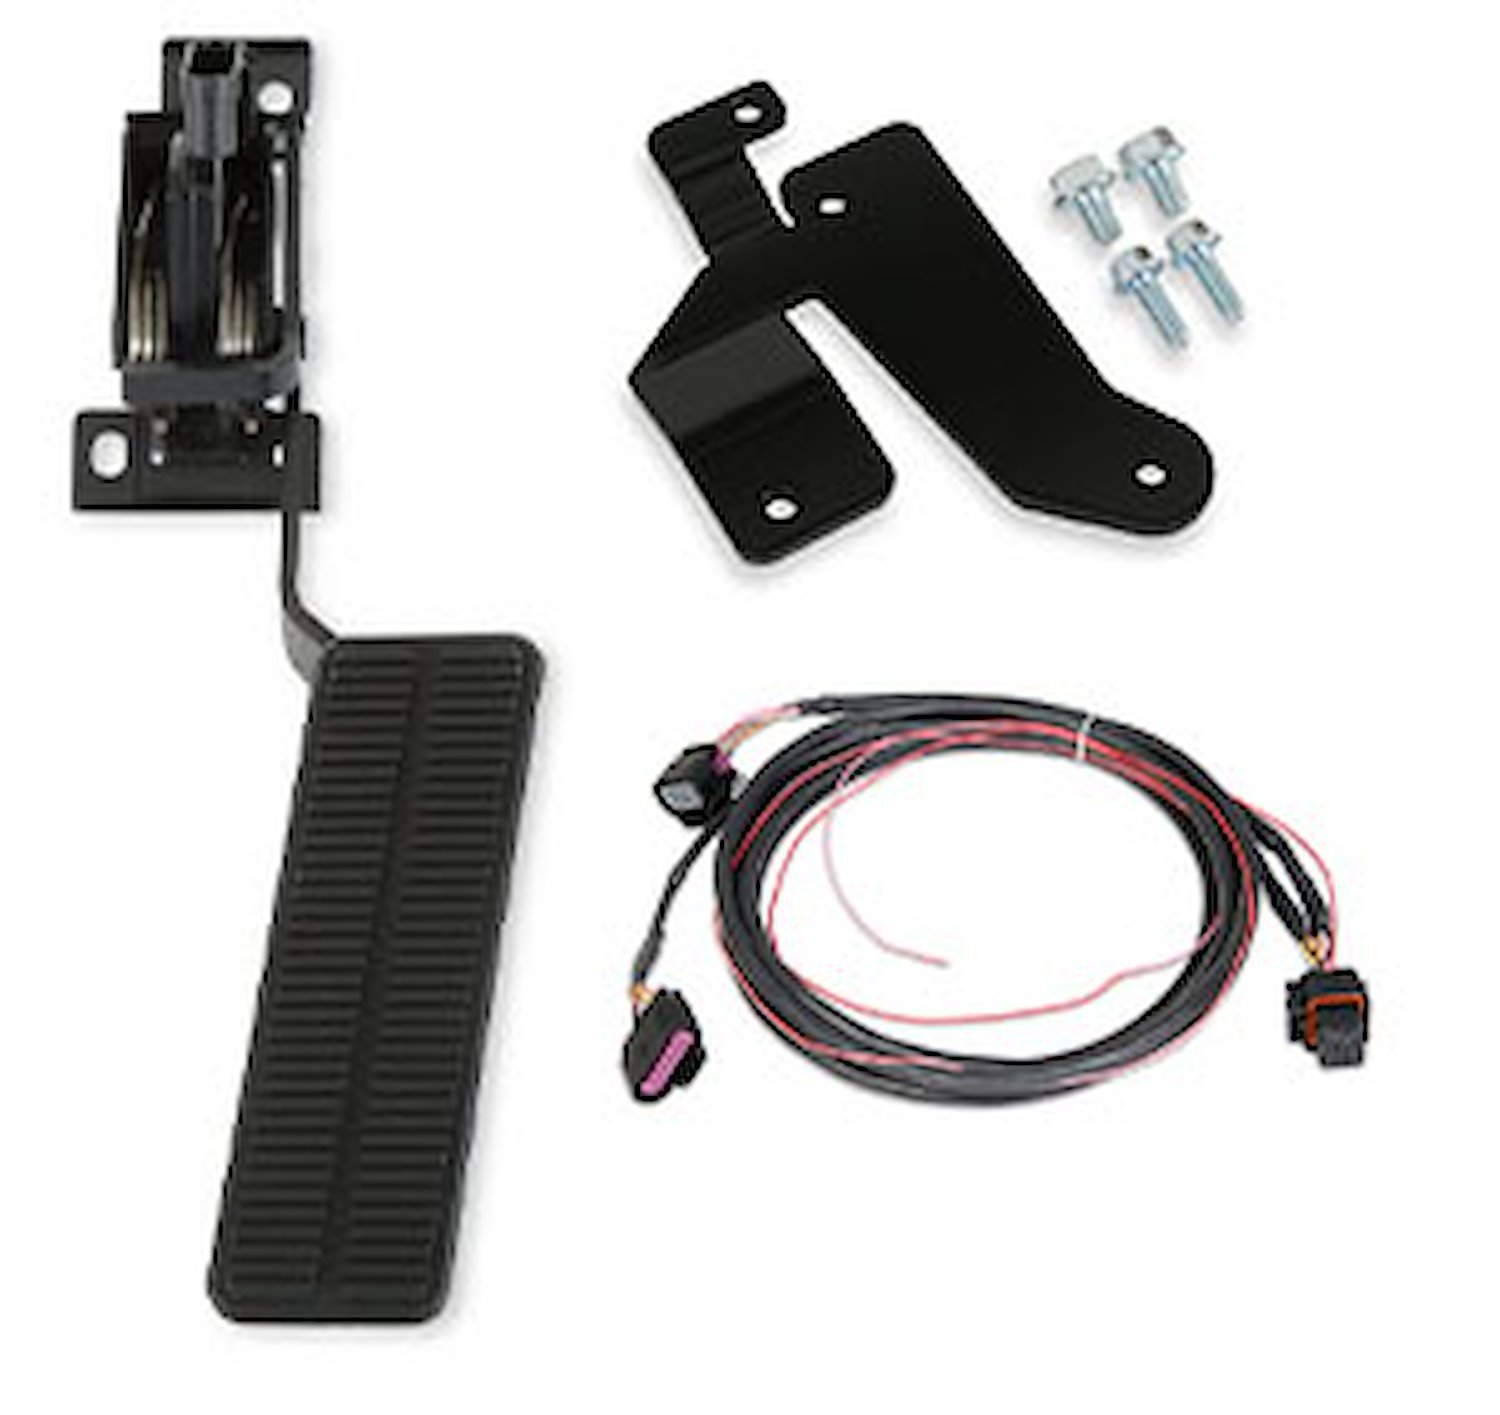 145-160 Drive-By-Wire Accelerator Pedal Assembly Kit for 1968-1974 Chevy, Pontiac, Oldsmobile w/GM LS, Gen V LT, Dominator EFI